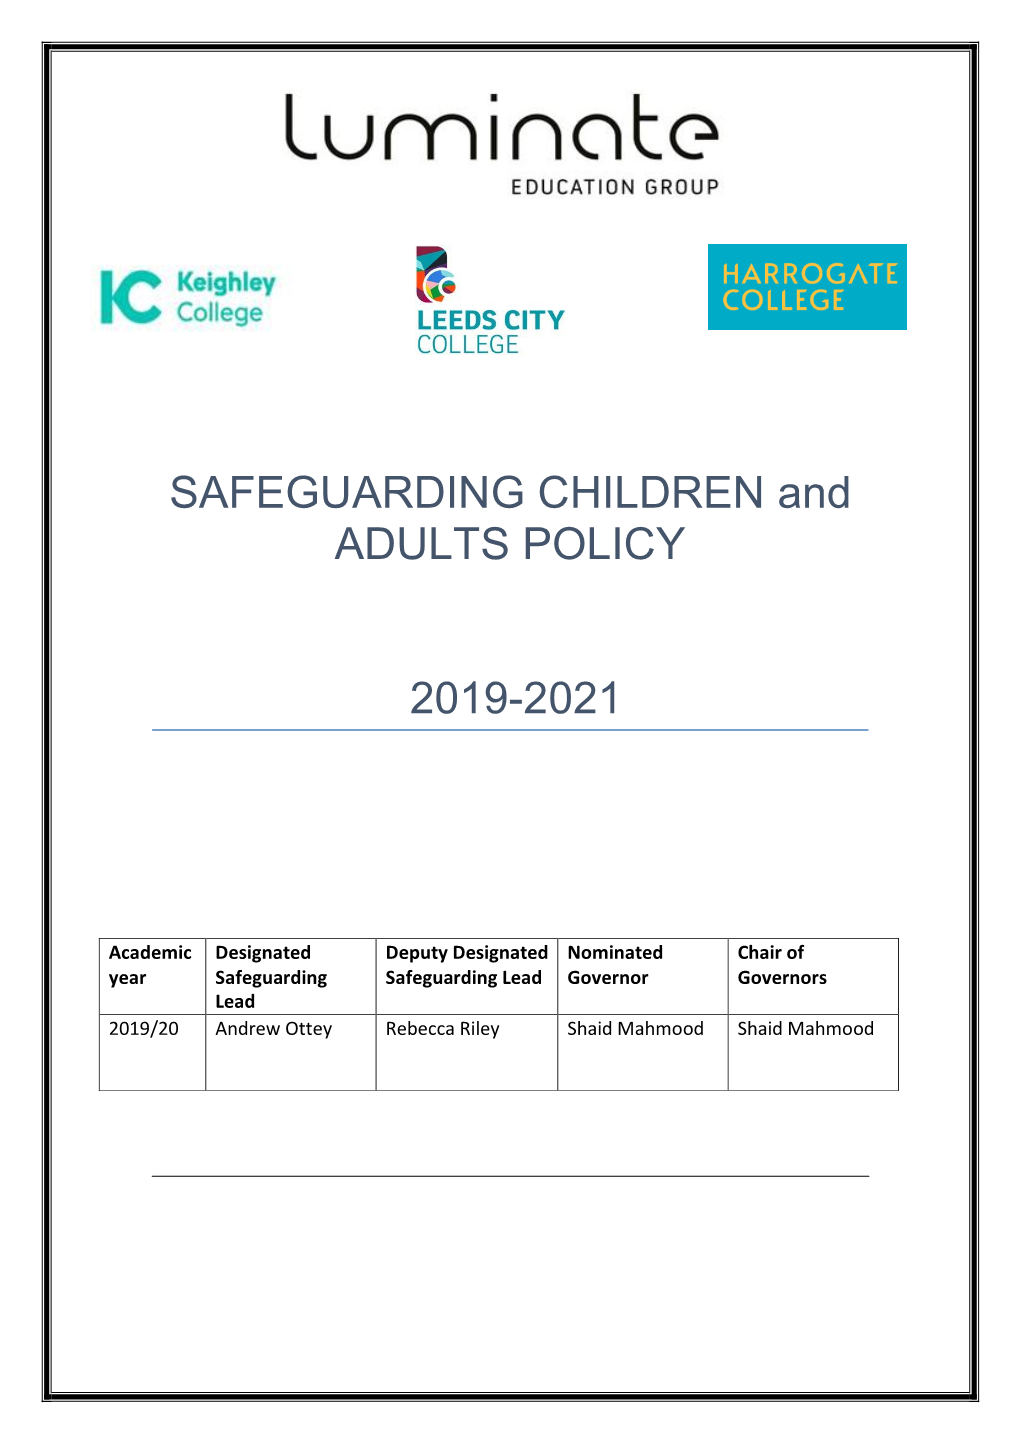 SAFEGUARDING CHILDREN and ADULTS POLICY